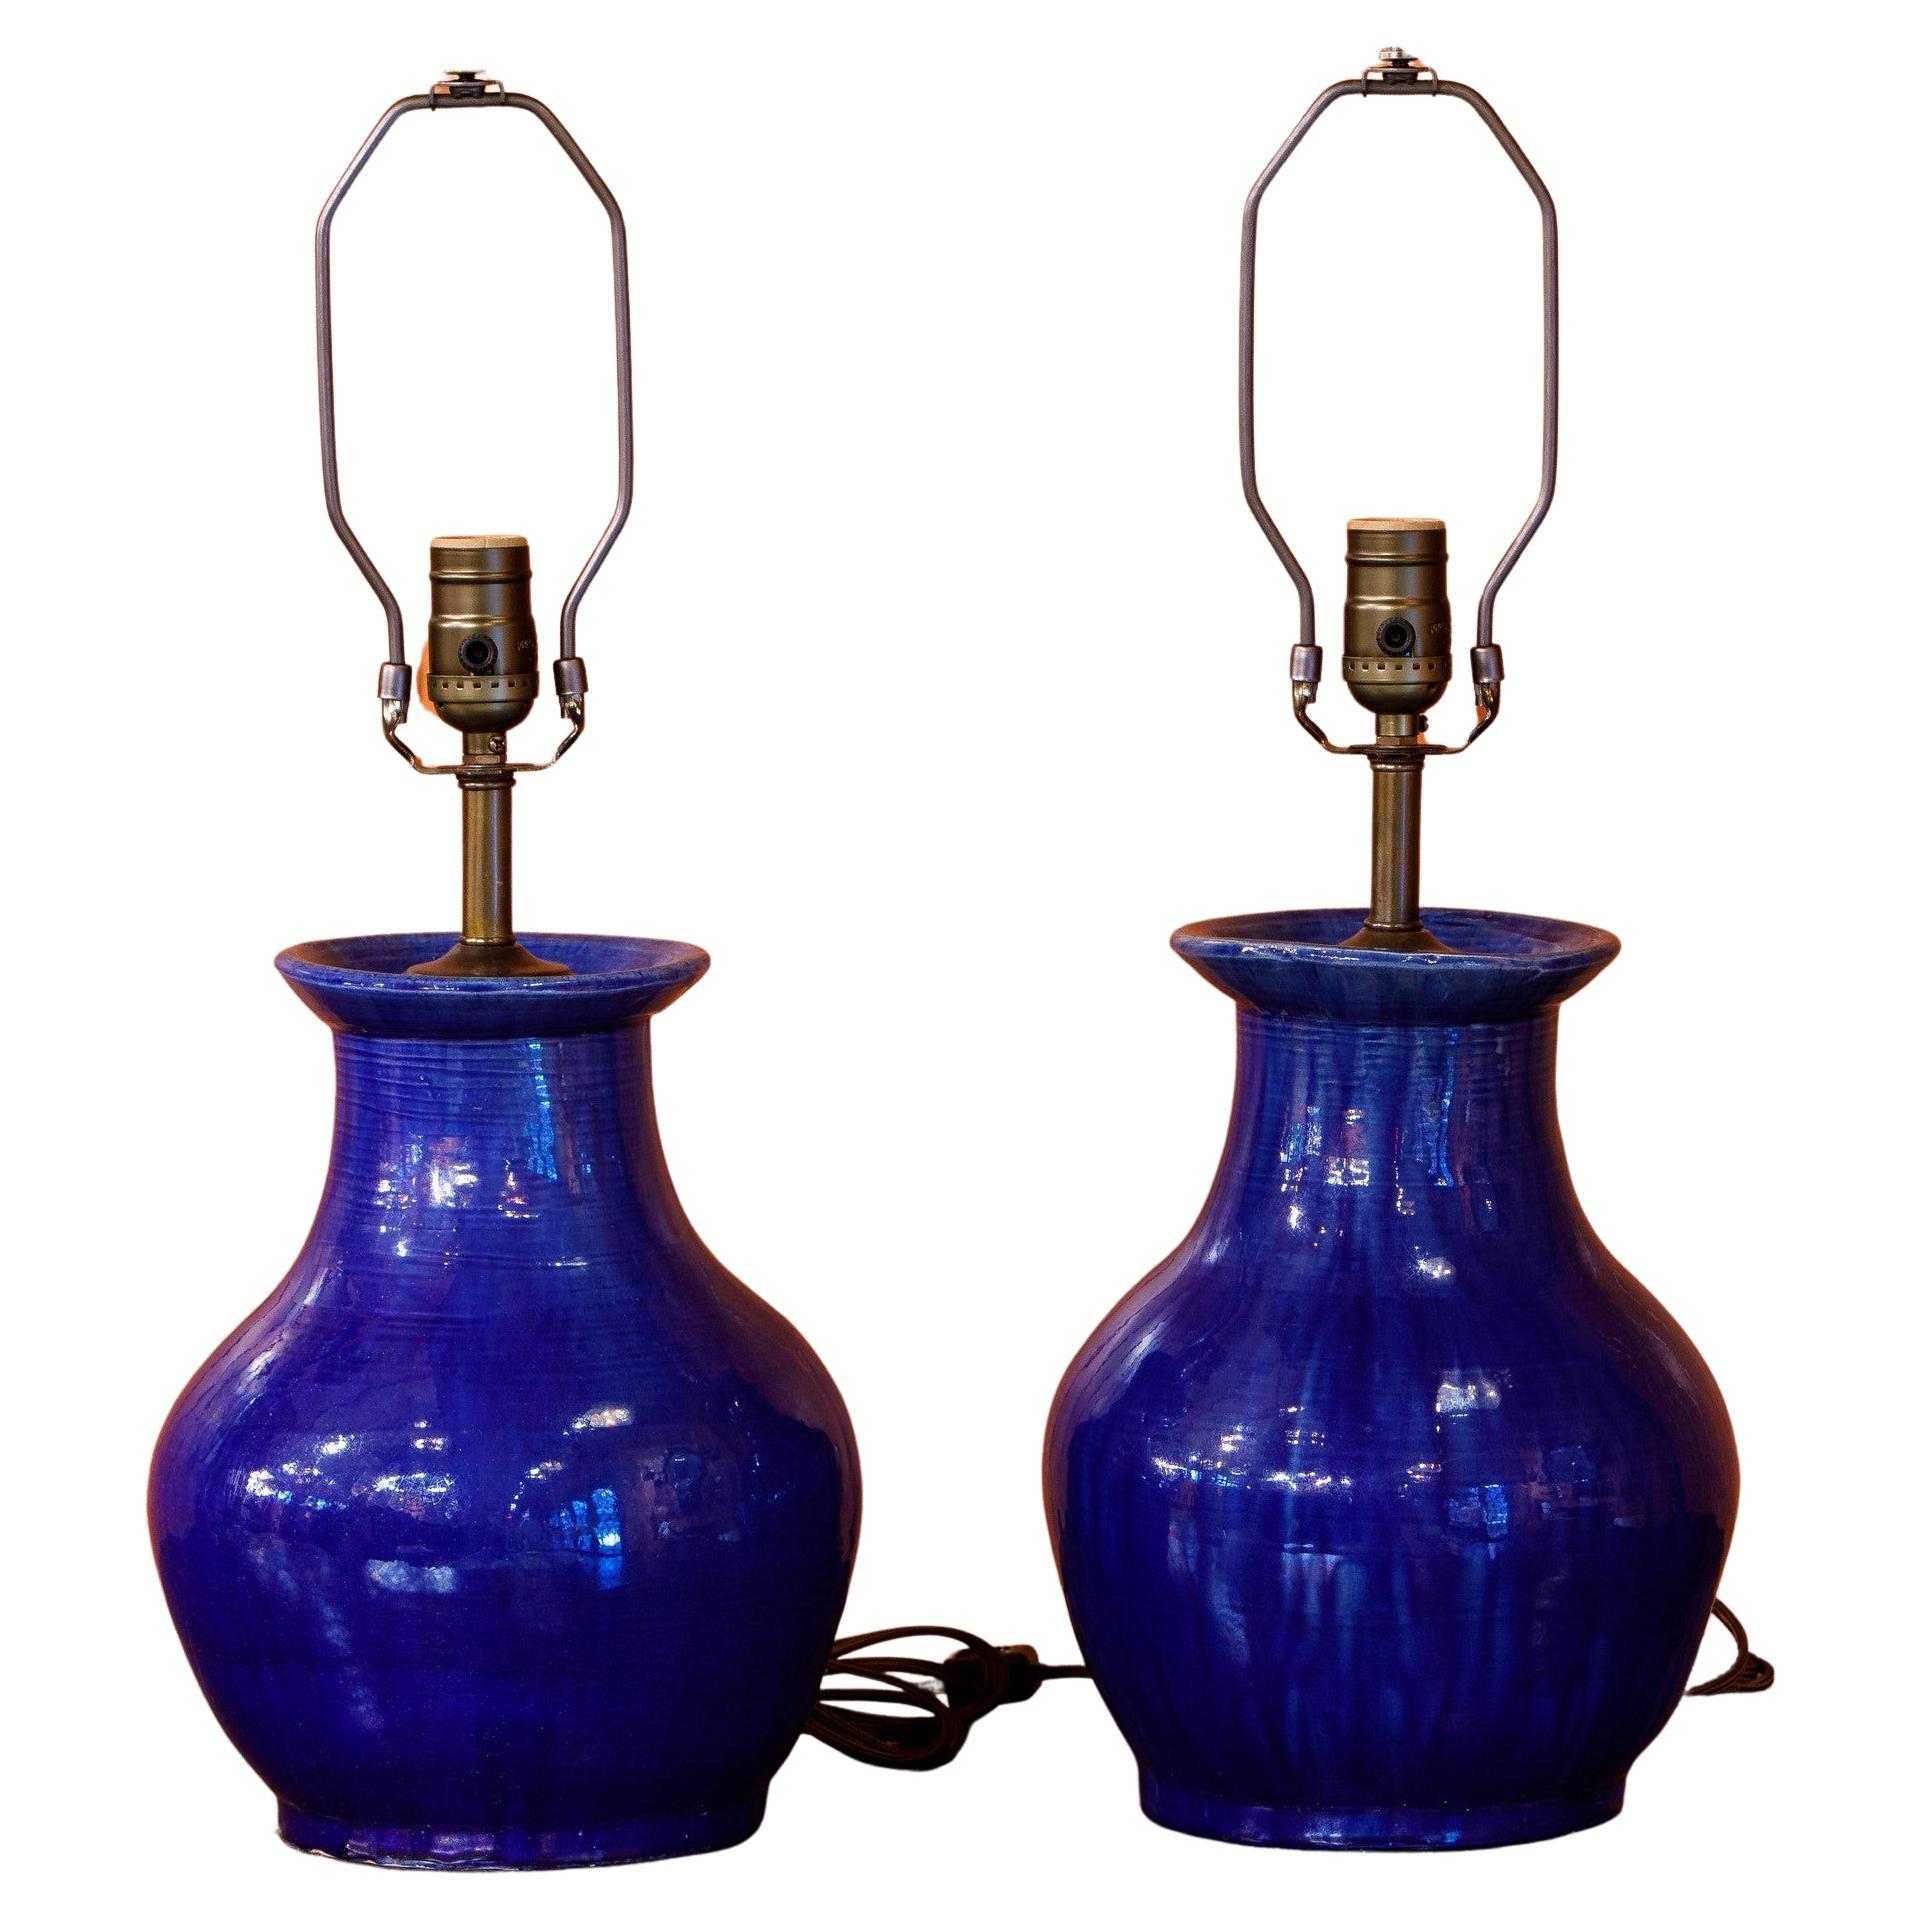 Pair of Cobalt Hand-Thrown Glazed Stoneware Table Lamps